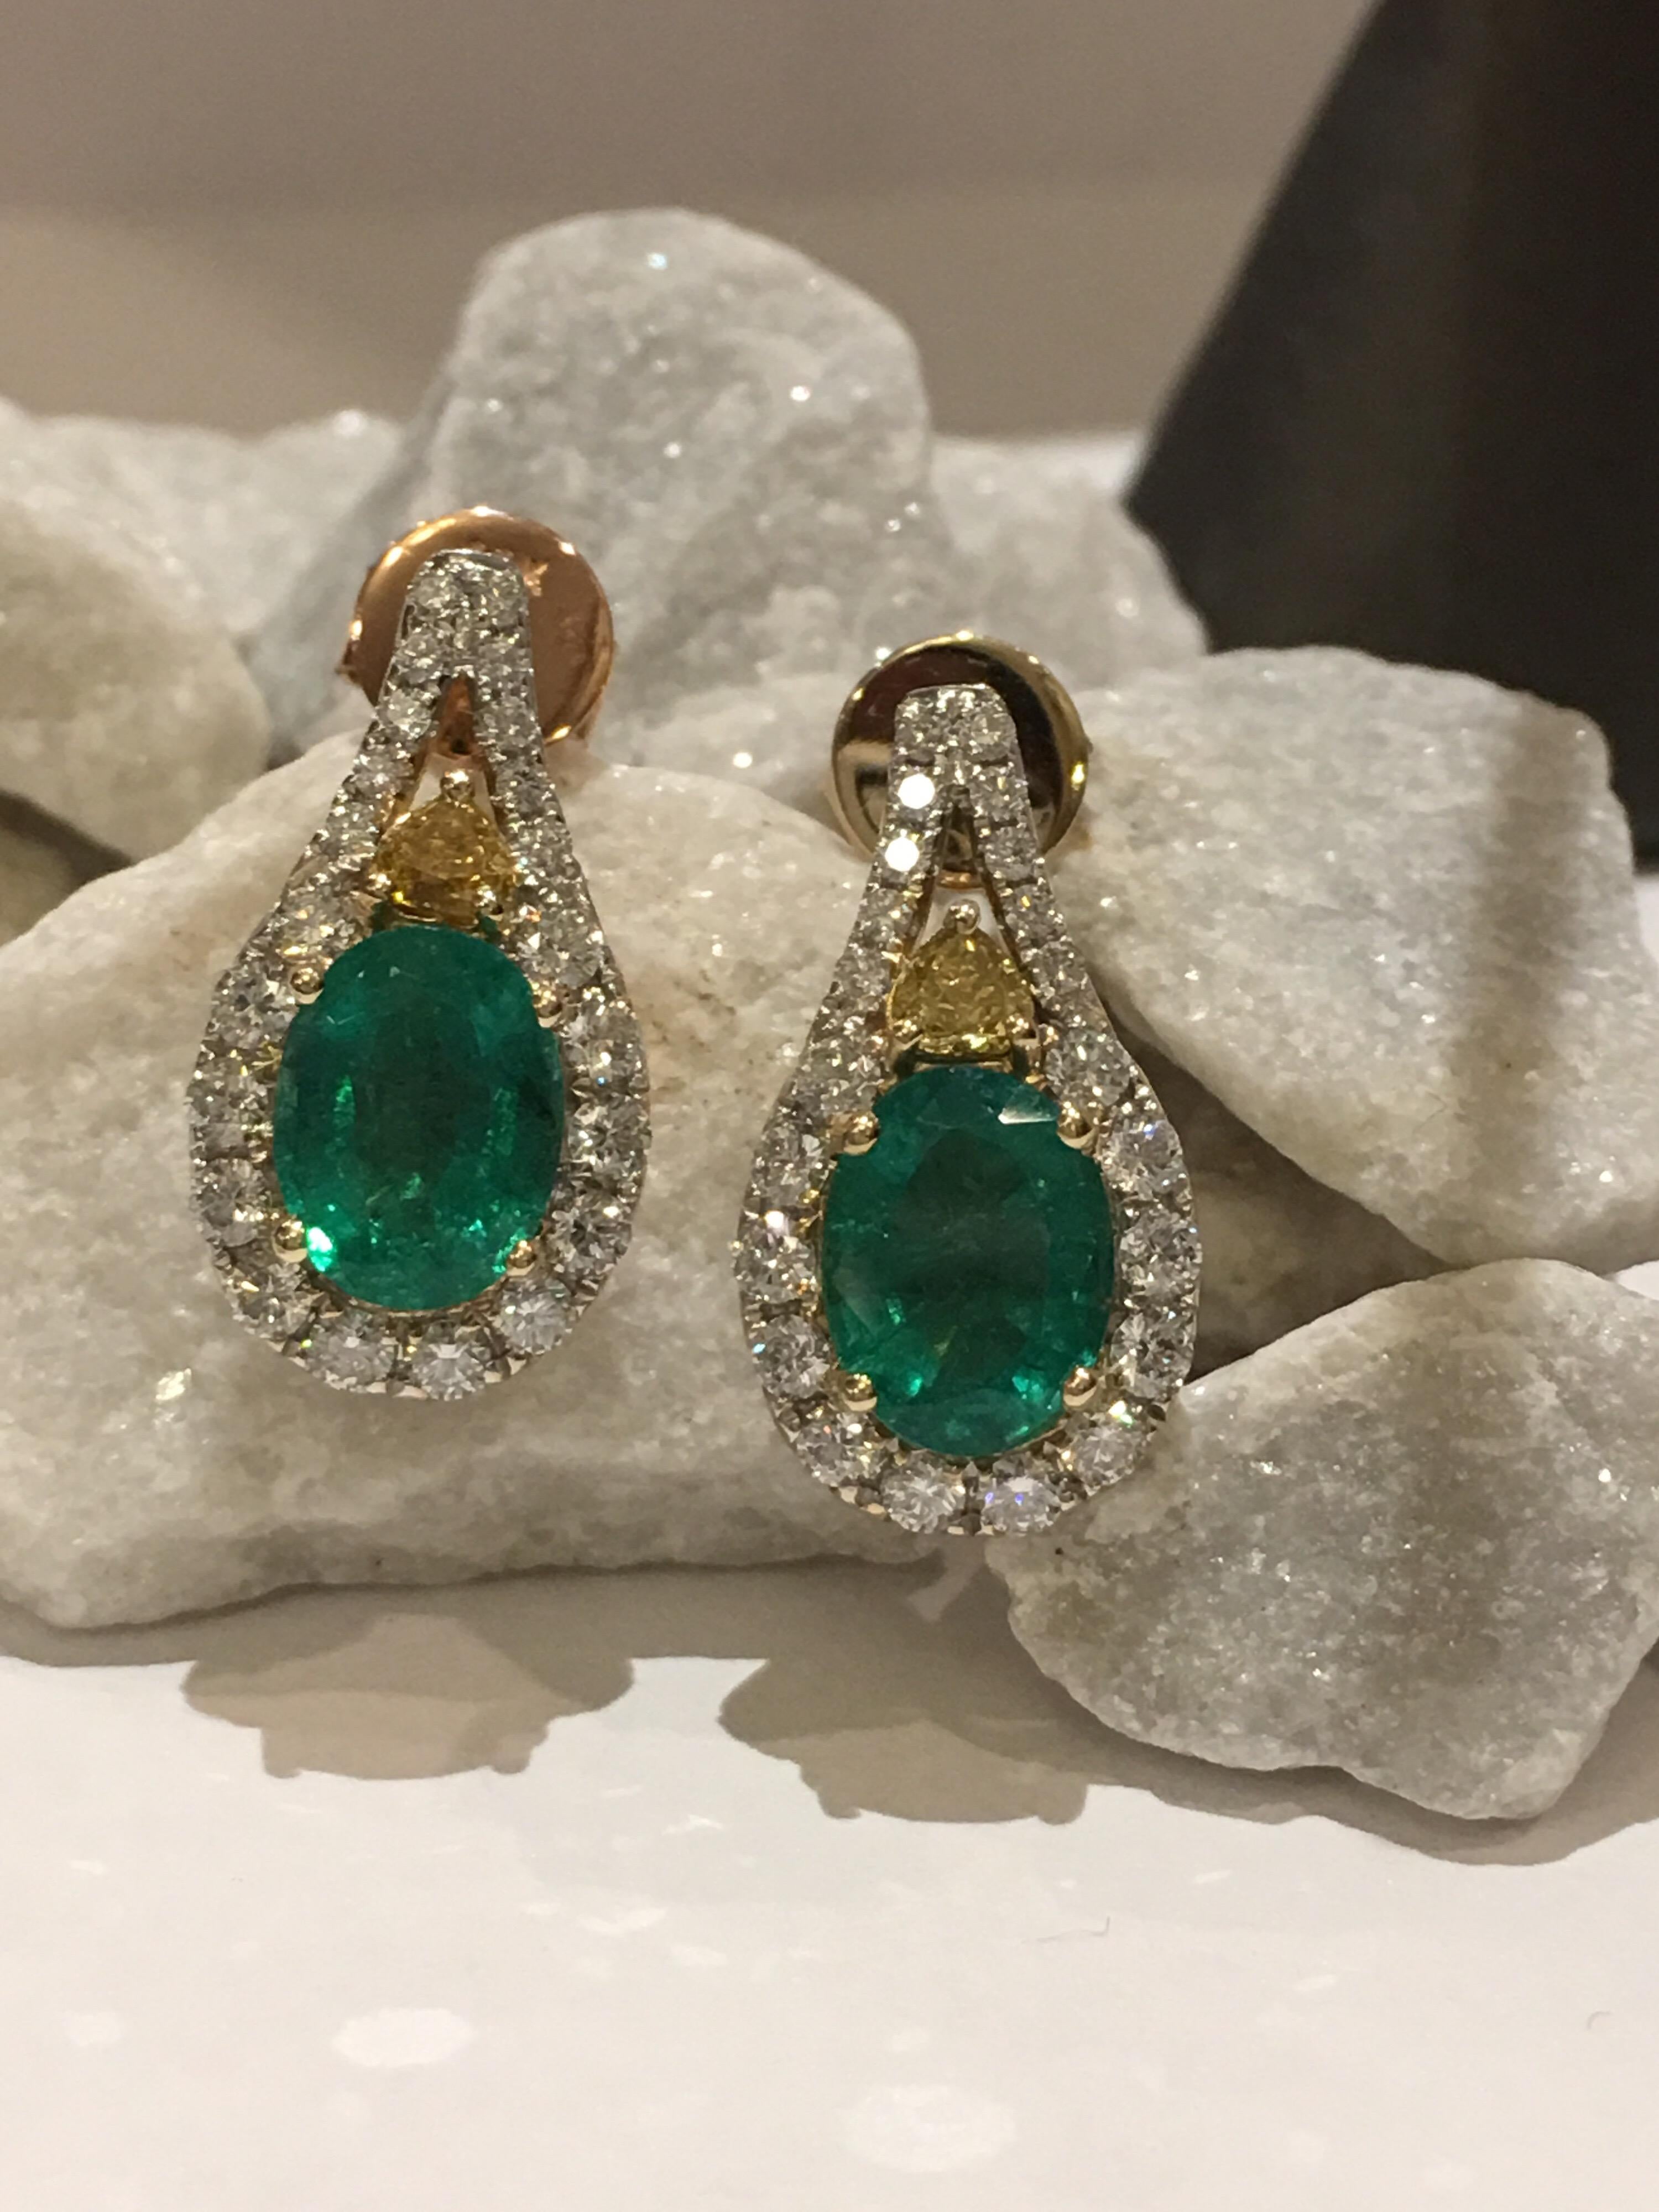 Natural Emerald with White and  Yellow Diamonds set in 14K Yellow Gold .
Oval Emerald Total weight is 2.10 Carat. White Diamonds weigh 0.76 Carat and Yellow Diamonds weigh 0.19 Carat.
The earring is one of a kind ,Handcrafted push back post